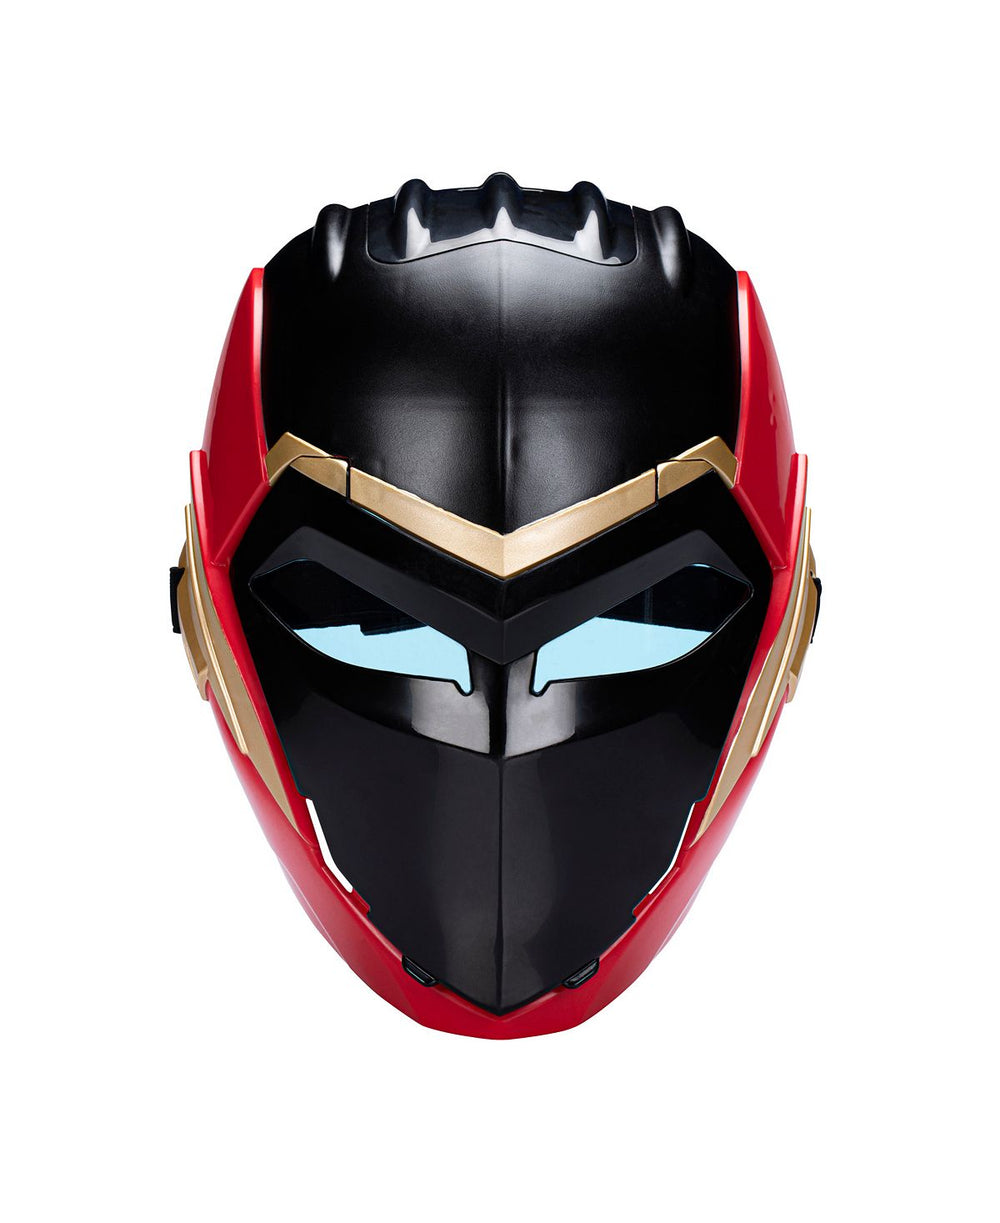 Marvel Black Panther Wakanda Forever - Ironheart Flip FX Mask with Light-Up Feature